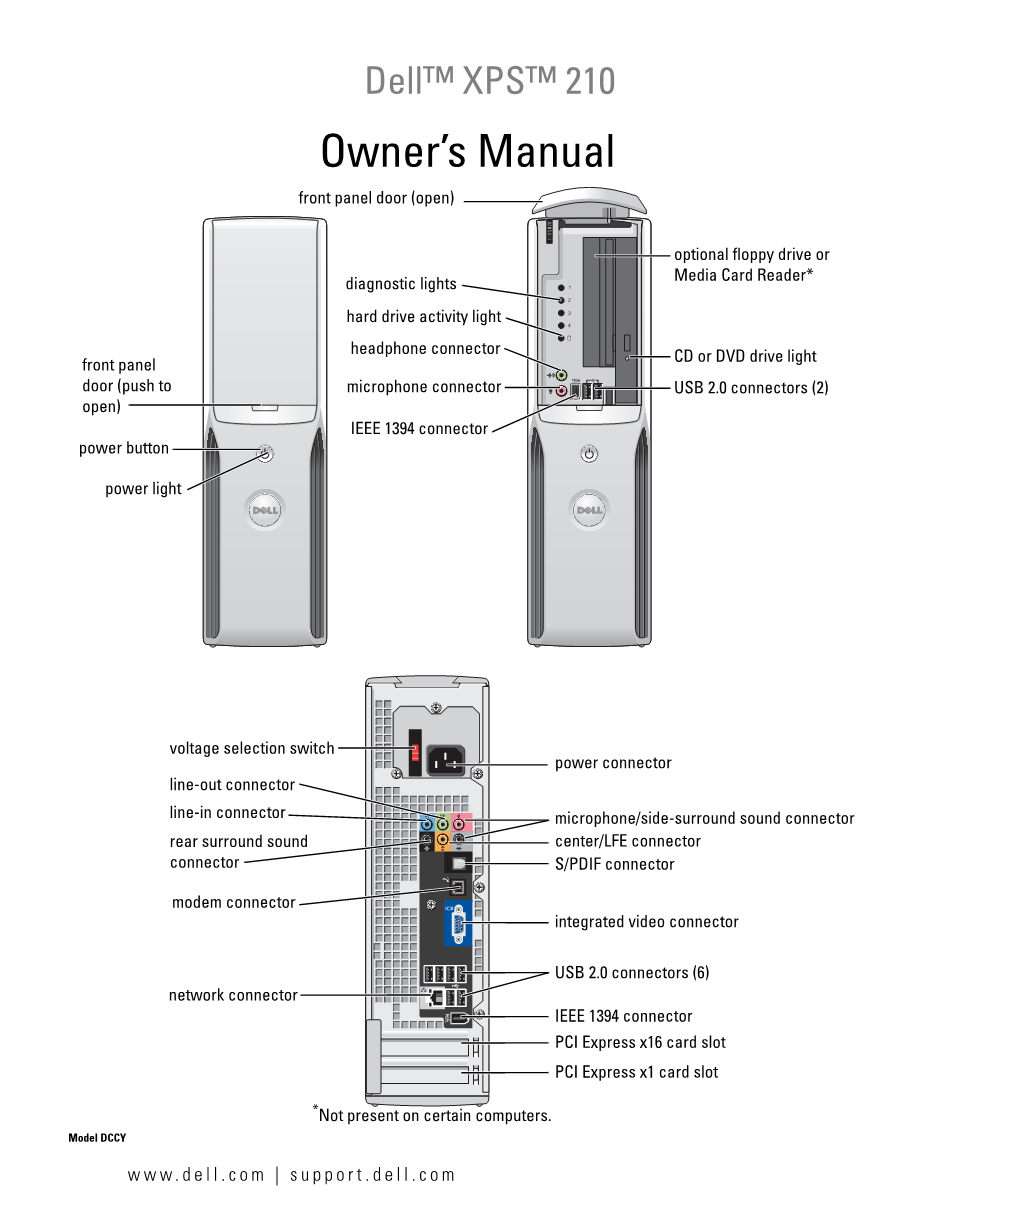 XPS 210 Owner's Manual